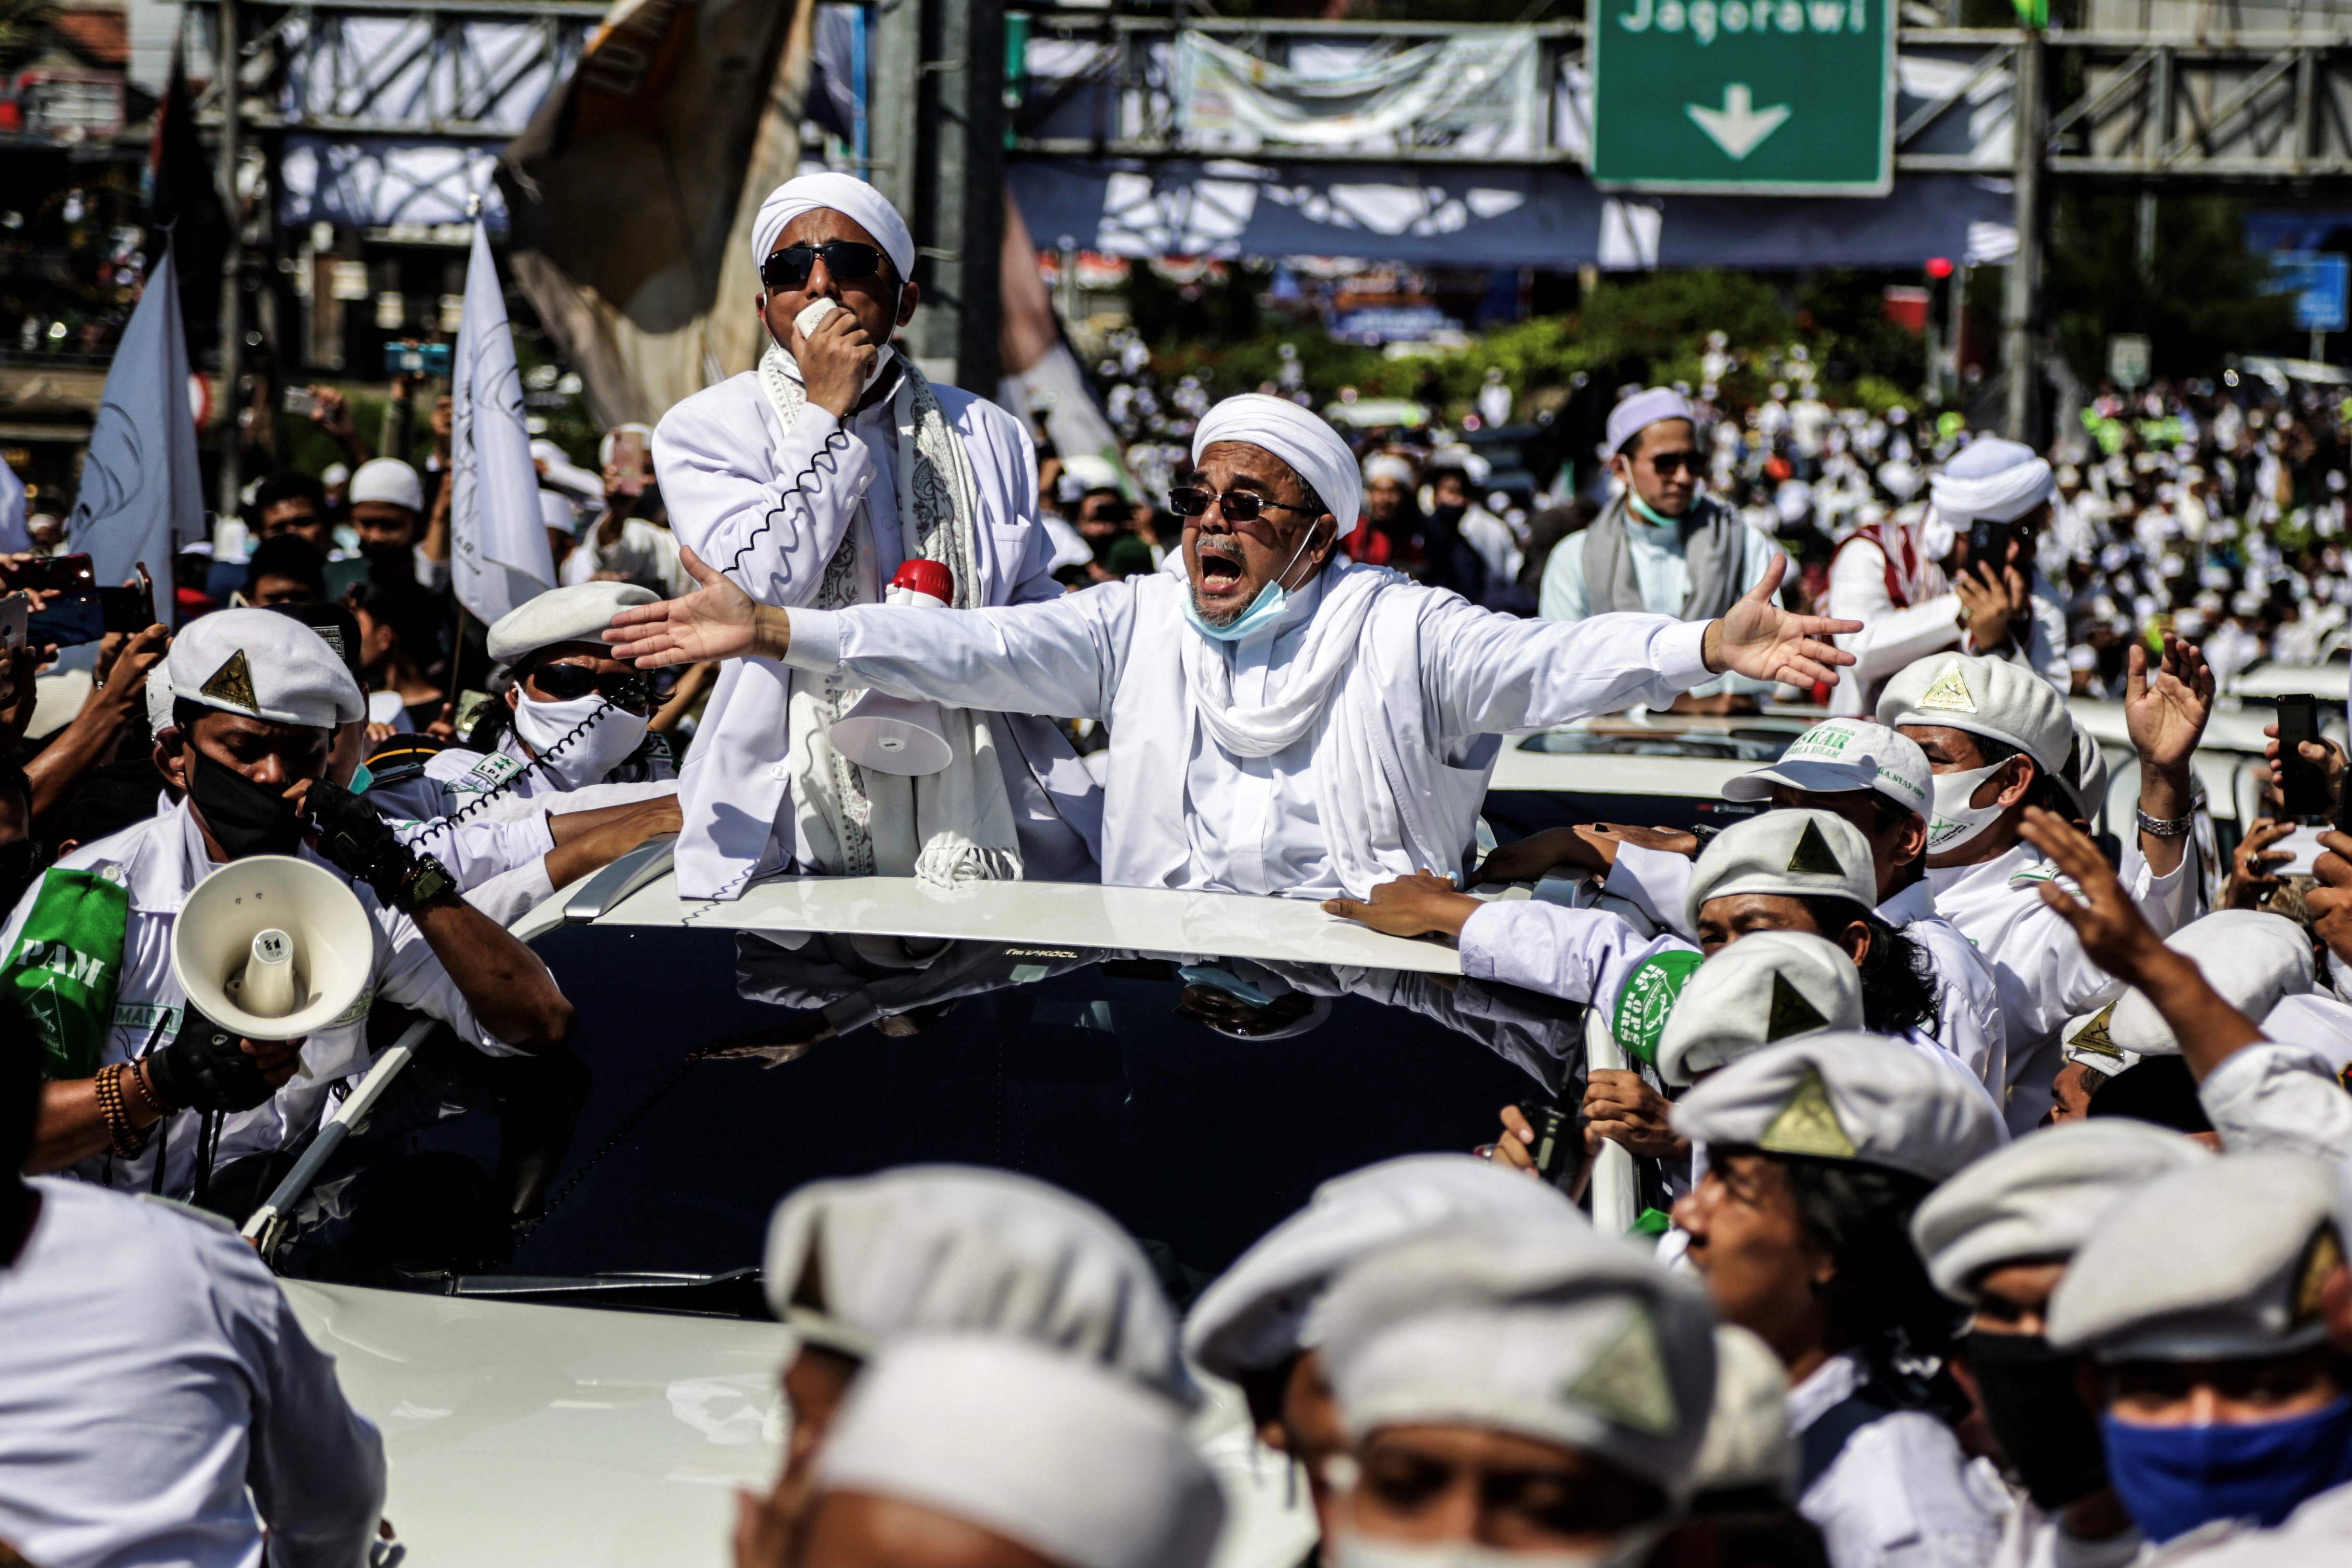 In this file photo taken on November 13, 2020, Muslim cleric Rizieq Shihab (C), leader of the Indonesian hardline organisation FPI (Front Pembela Islam or Islamic Defenders Front), gestures to supporters as he arrives to inaugurate a mosque in Bogor. - Indonesia has banned an influential hardline Islamic group as police held its leader in custody over allegations he violated virus protocols by holding mass gatherings, the country's chief security minister said on December 30, 2020. Credit: AFP Photo